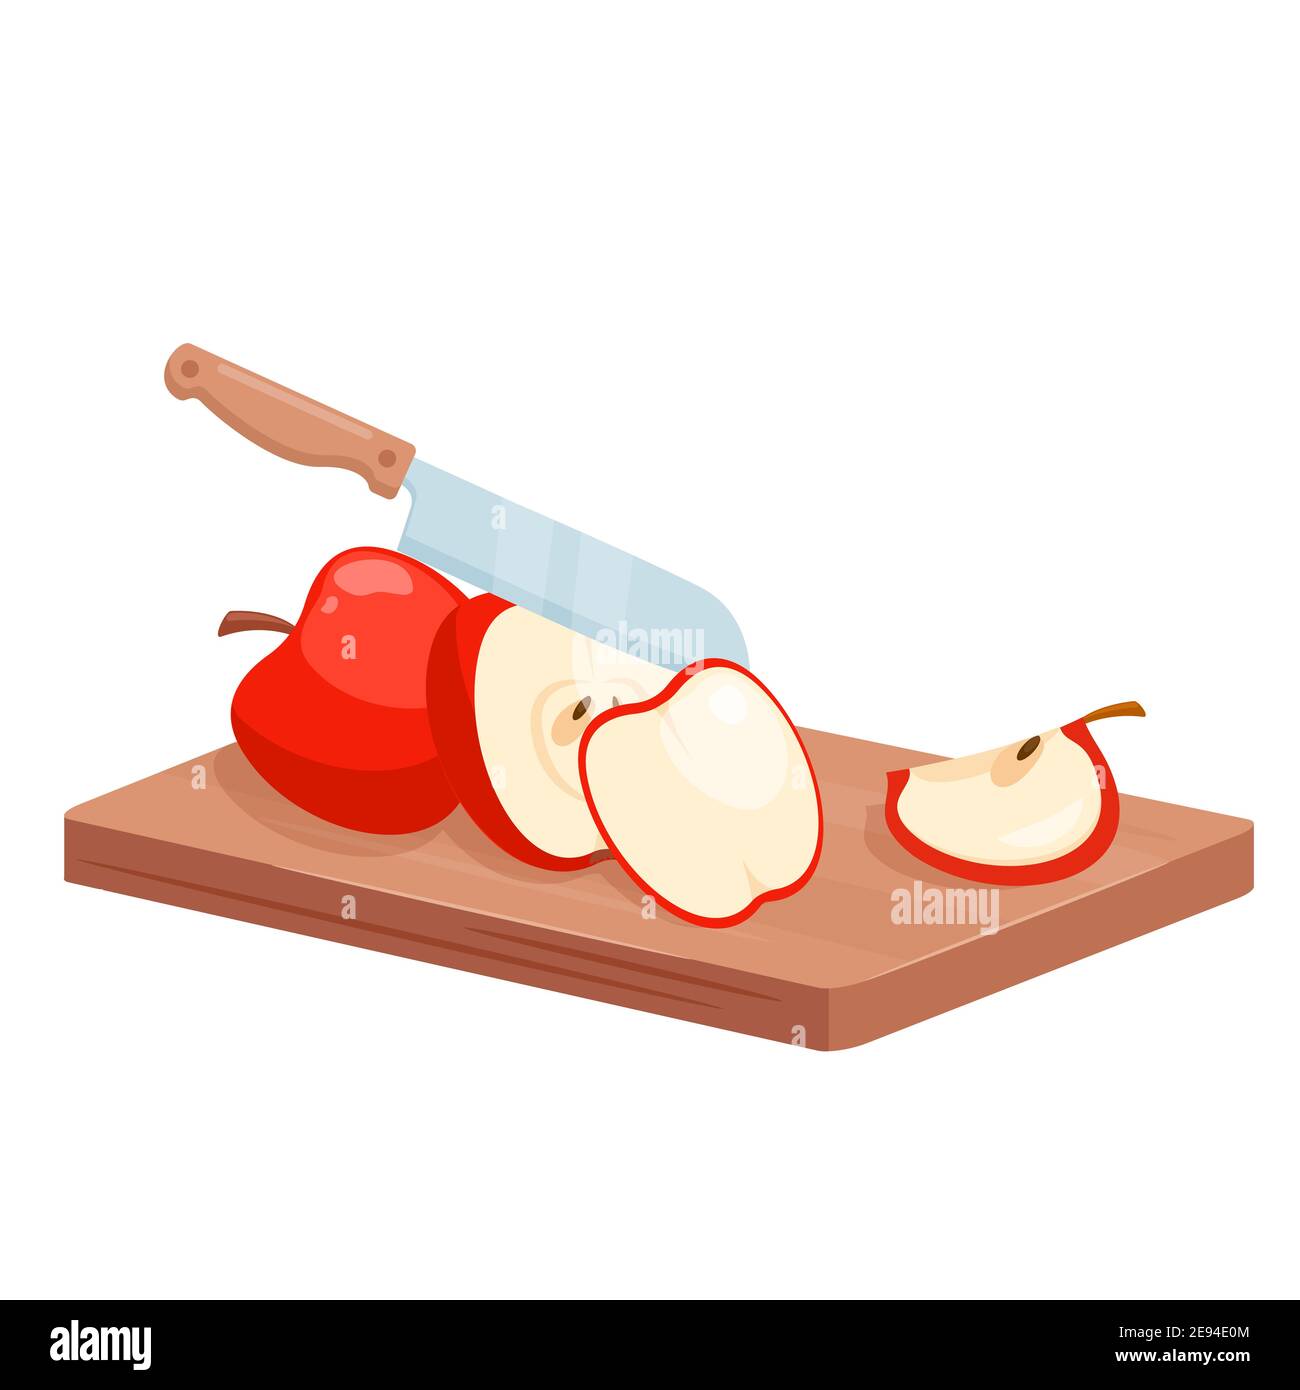 Cut apple into pieces, isometric cutting wooden board with fresh apple slices in kitchen Stock Vector